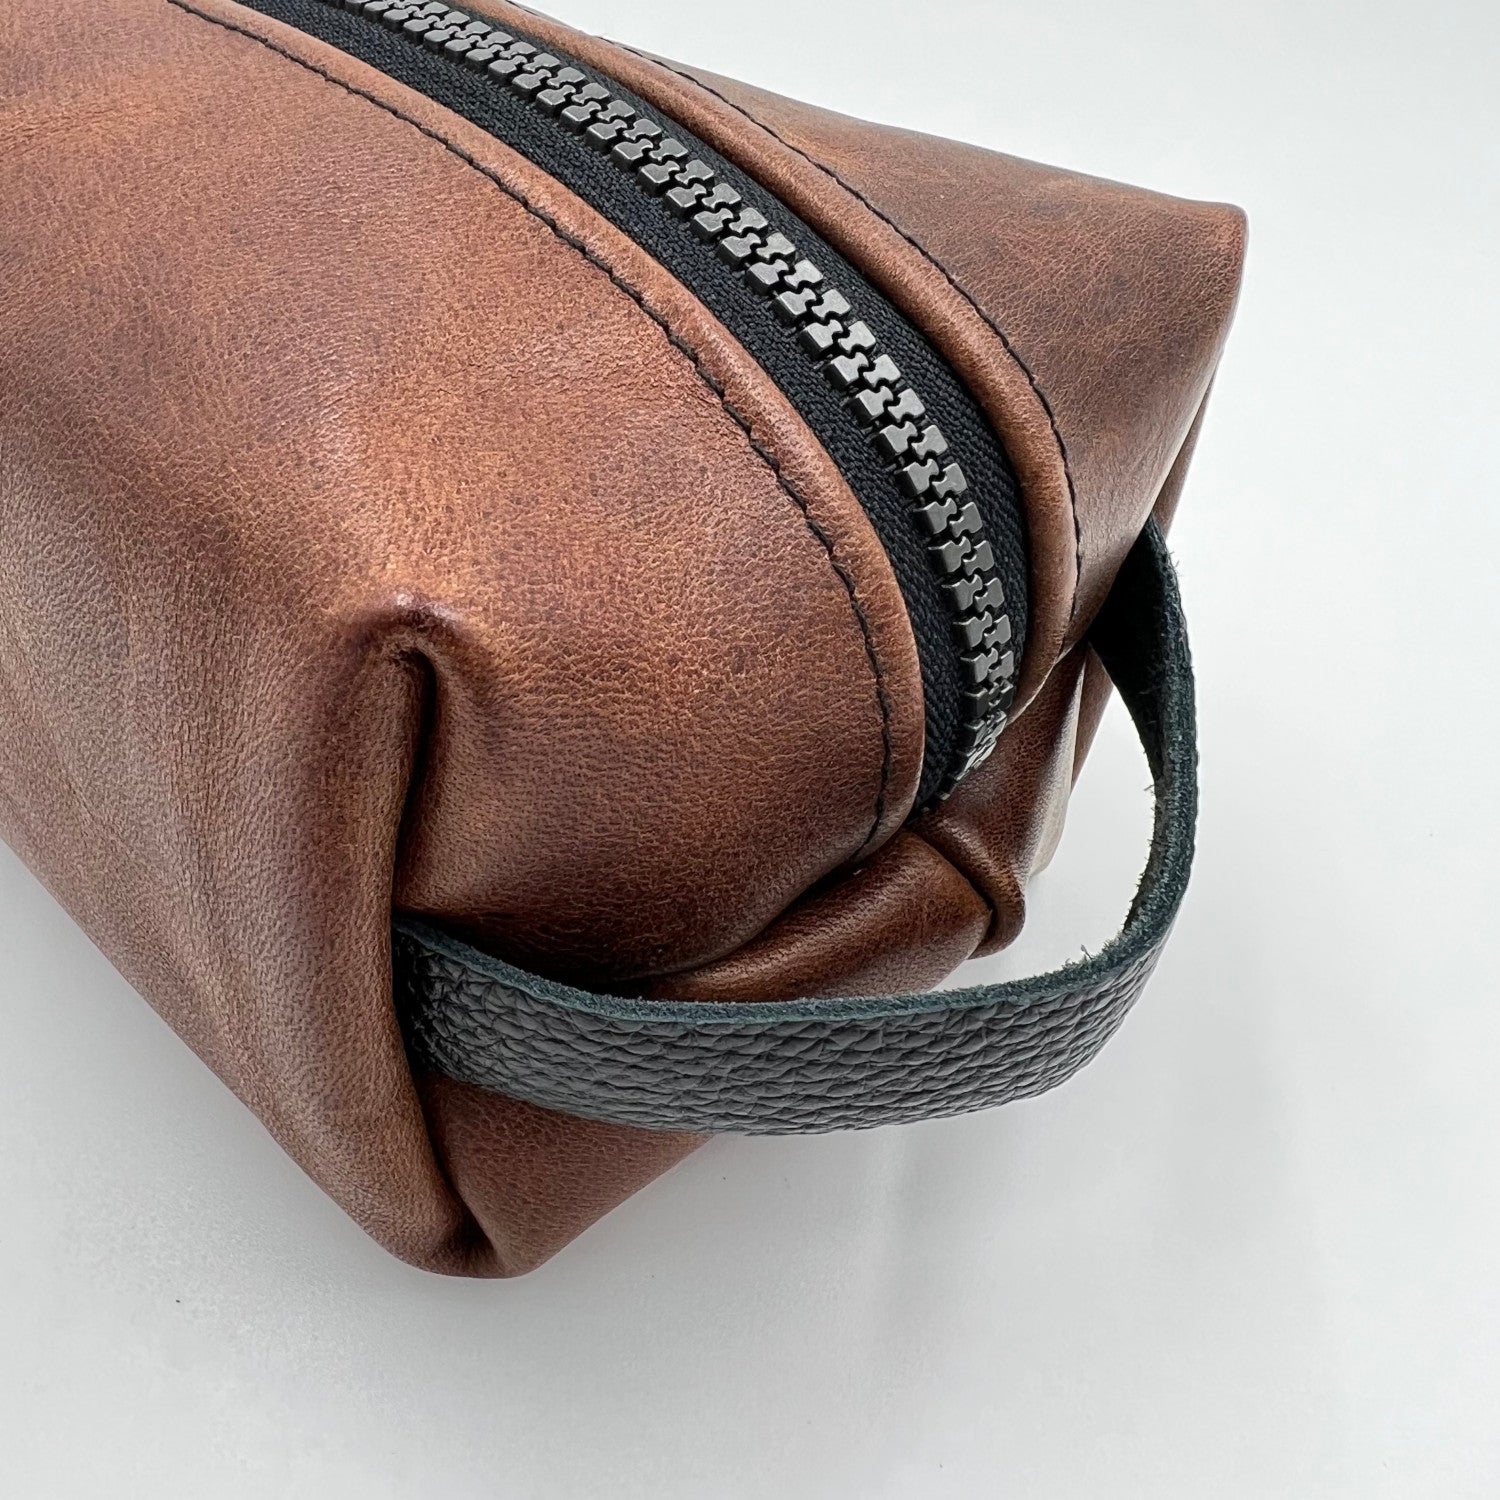 brown leather toiletry bag